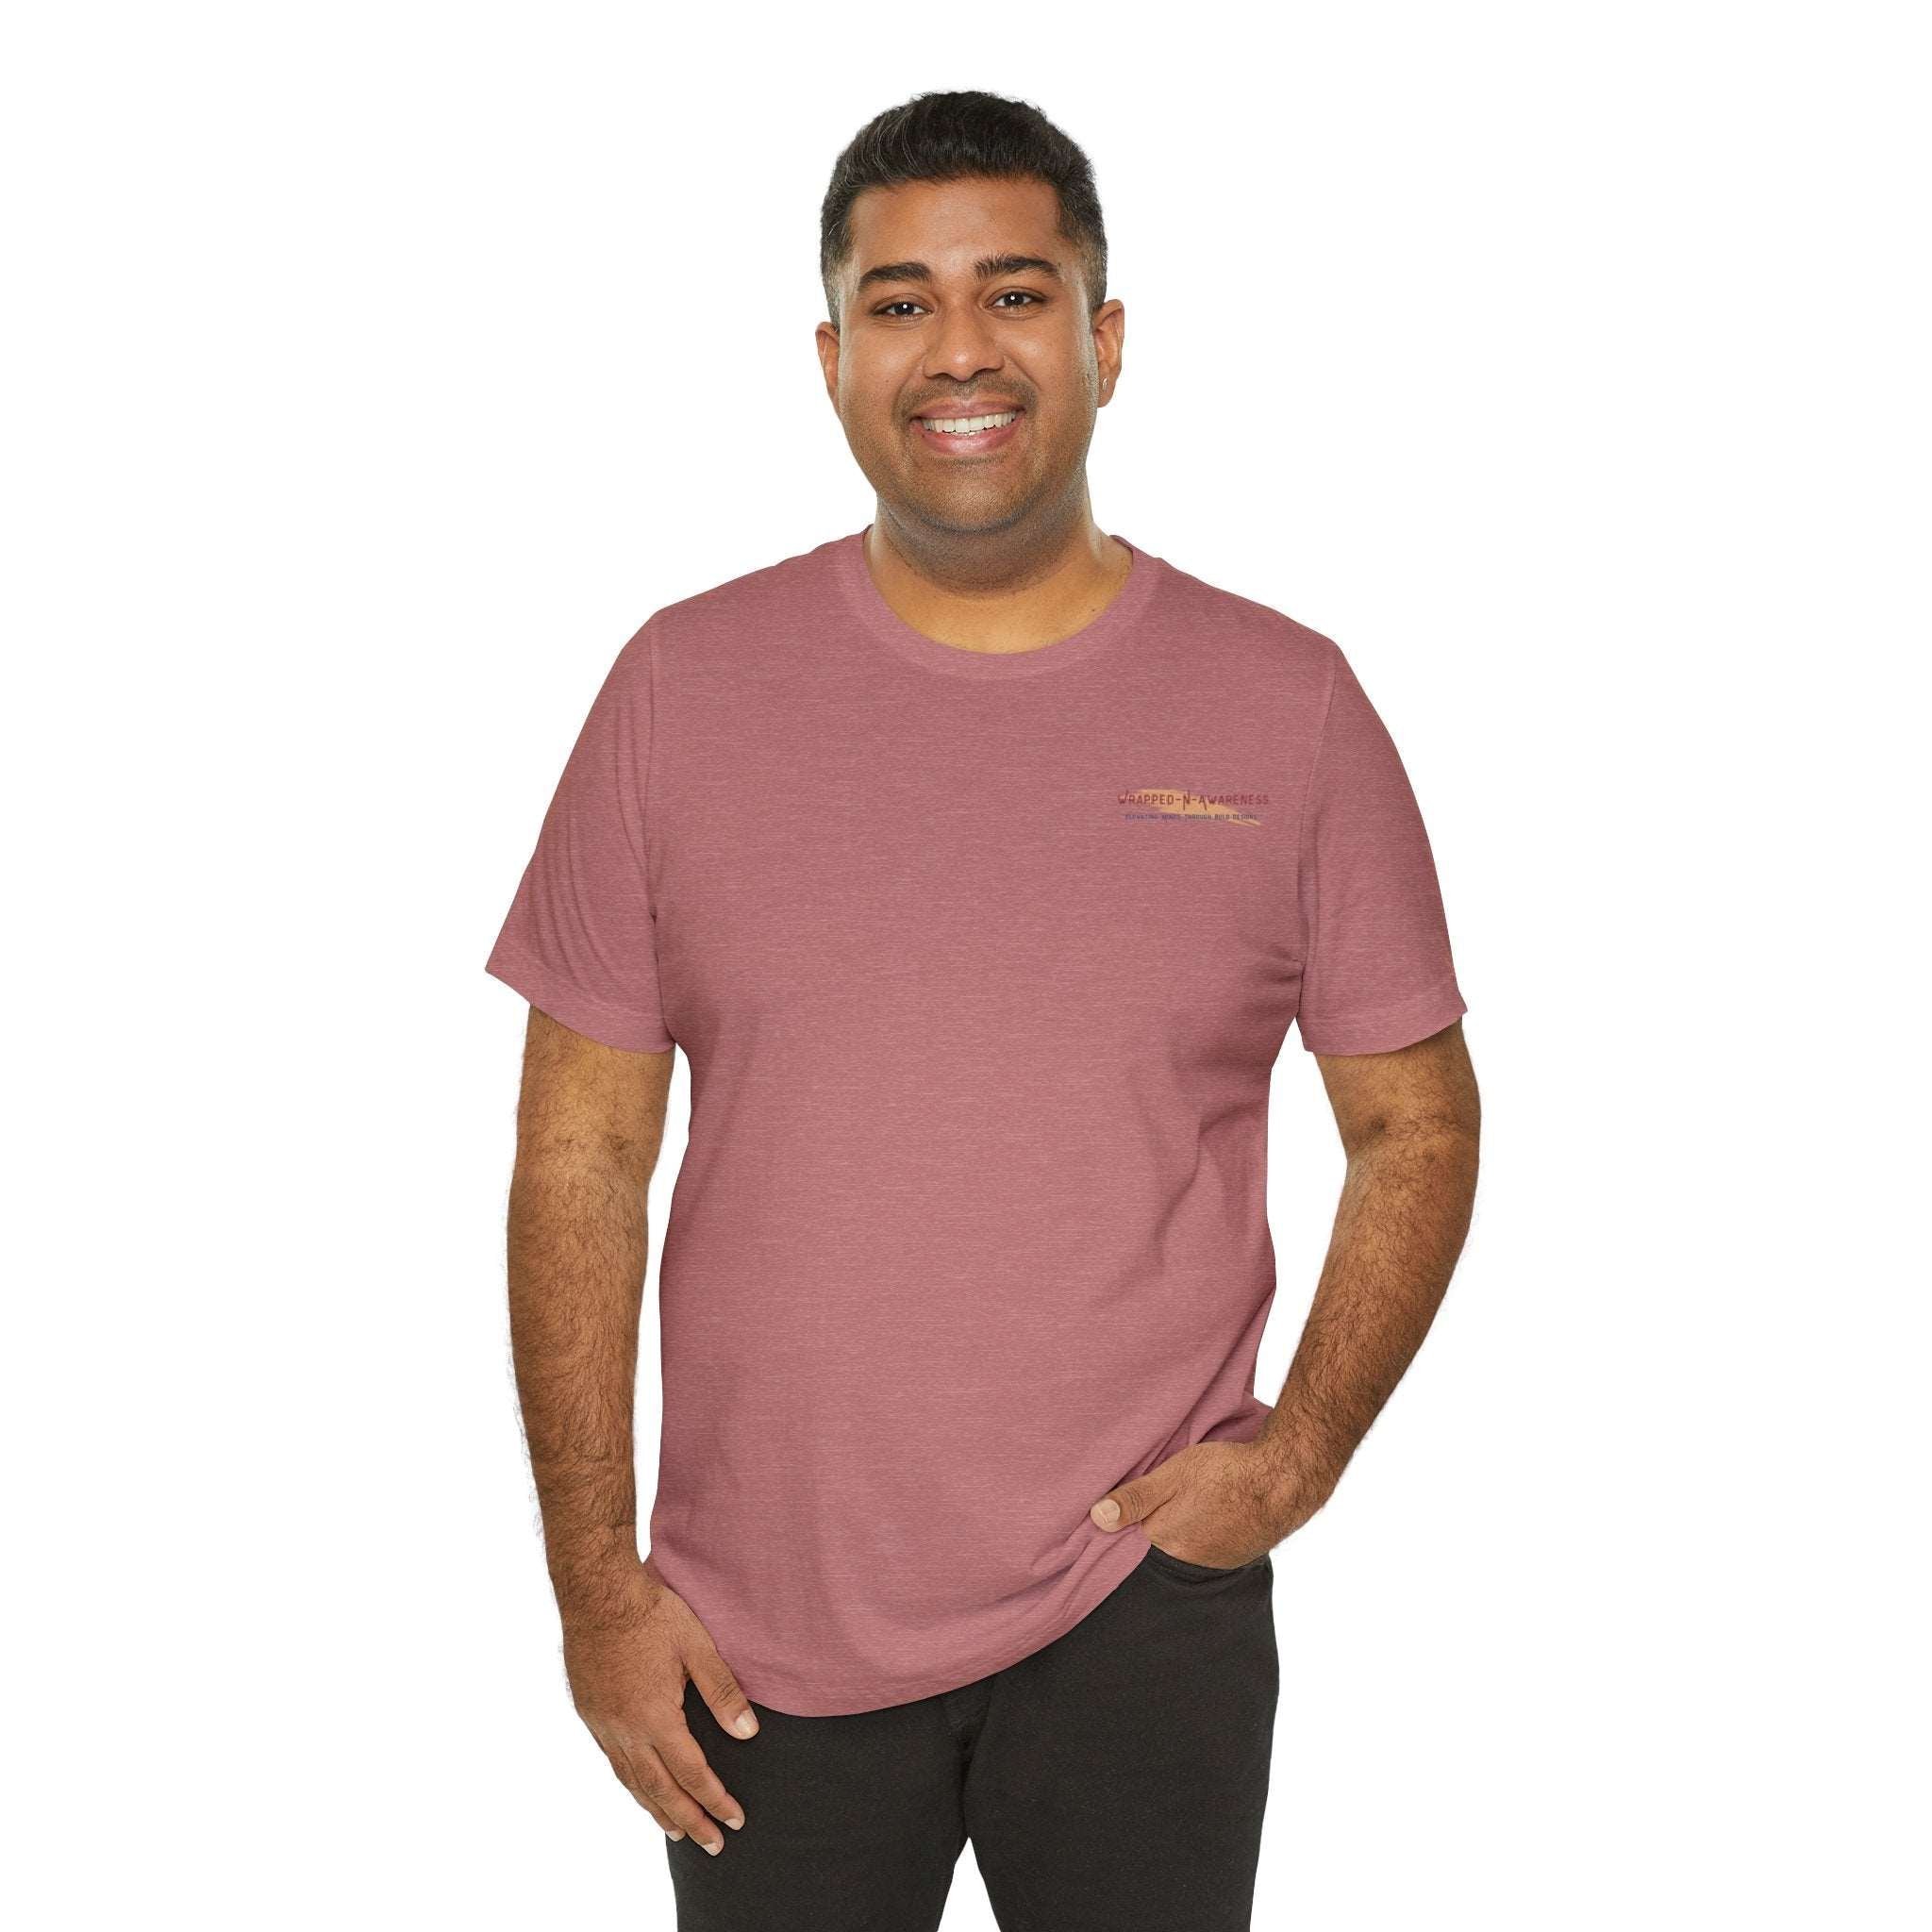 Embrace Self-Care Jersey Tee - Bella+Canvas 3001 Heather Mauve Airlume Cotton Bella+Canvas 3001 Crew Neckline Jersey Short Sleeve Lightweight Fabric Mental Health Support Retail Fit Tear-away Label Tee Unisex Tee T-Shirt 813686046313858069_2048_579afa0e-015f-4f3c-b9b7-cd17fca19f9e Printify